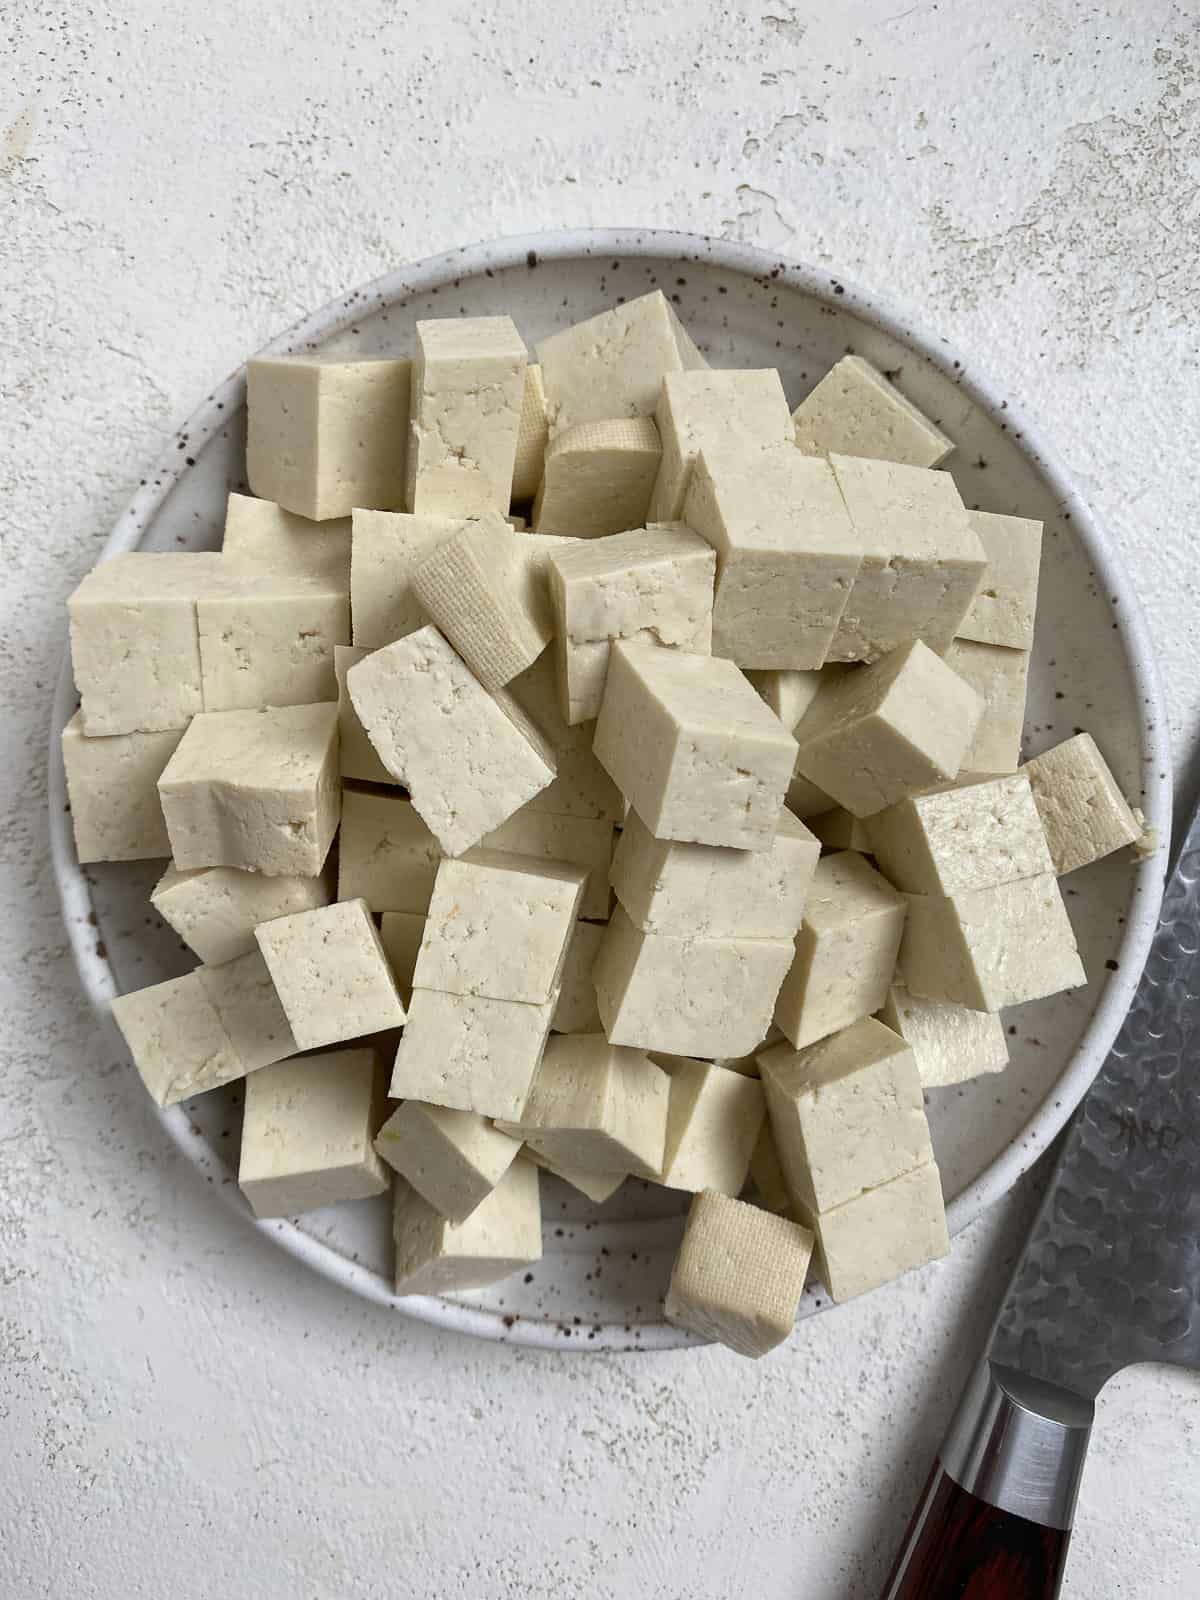 cubed tofu in a white plate against a white background